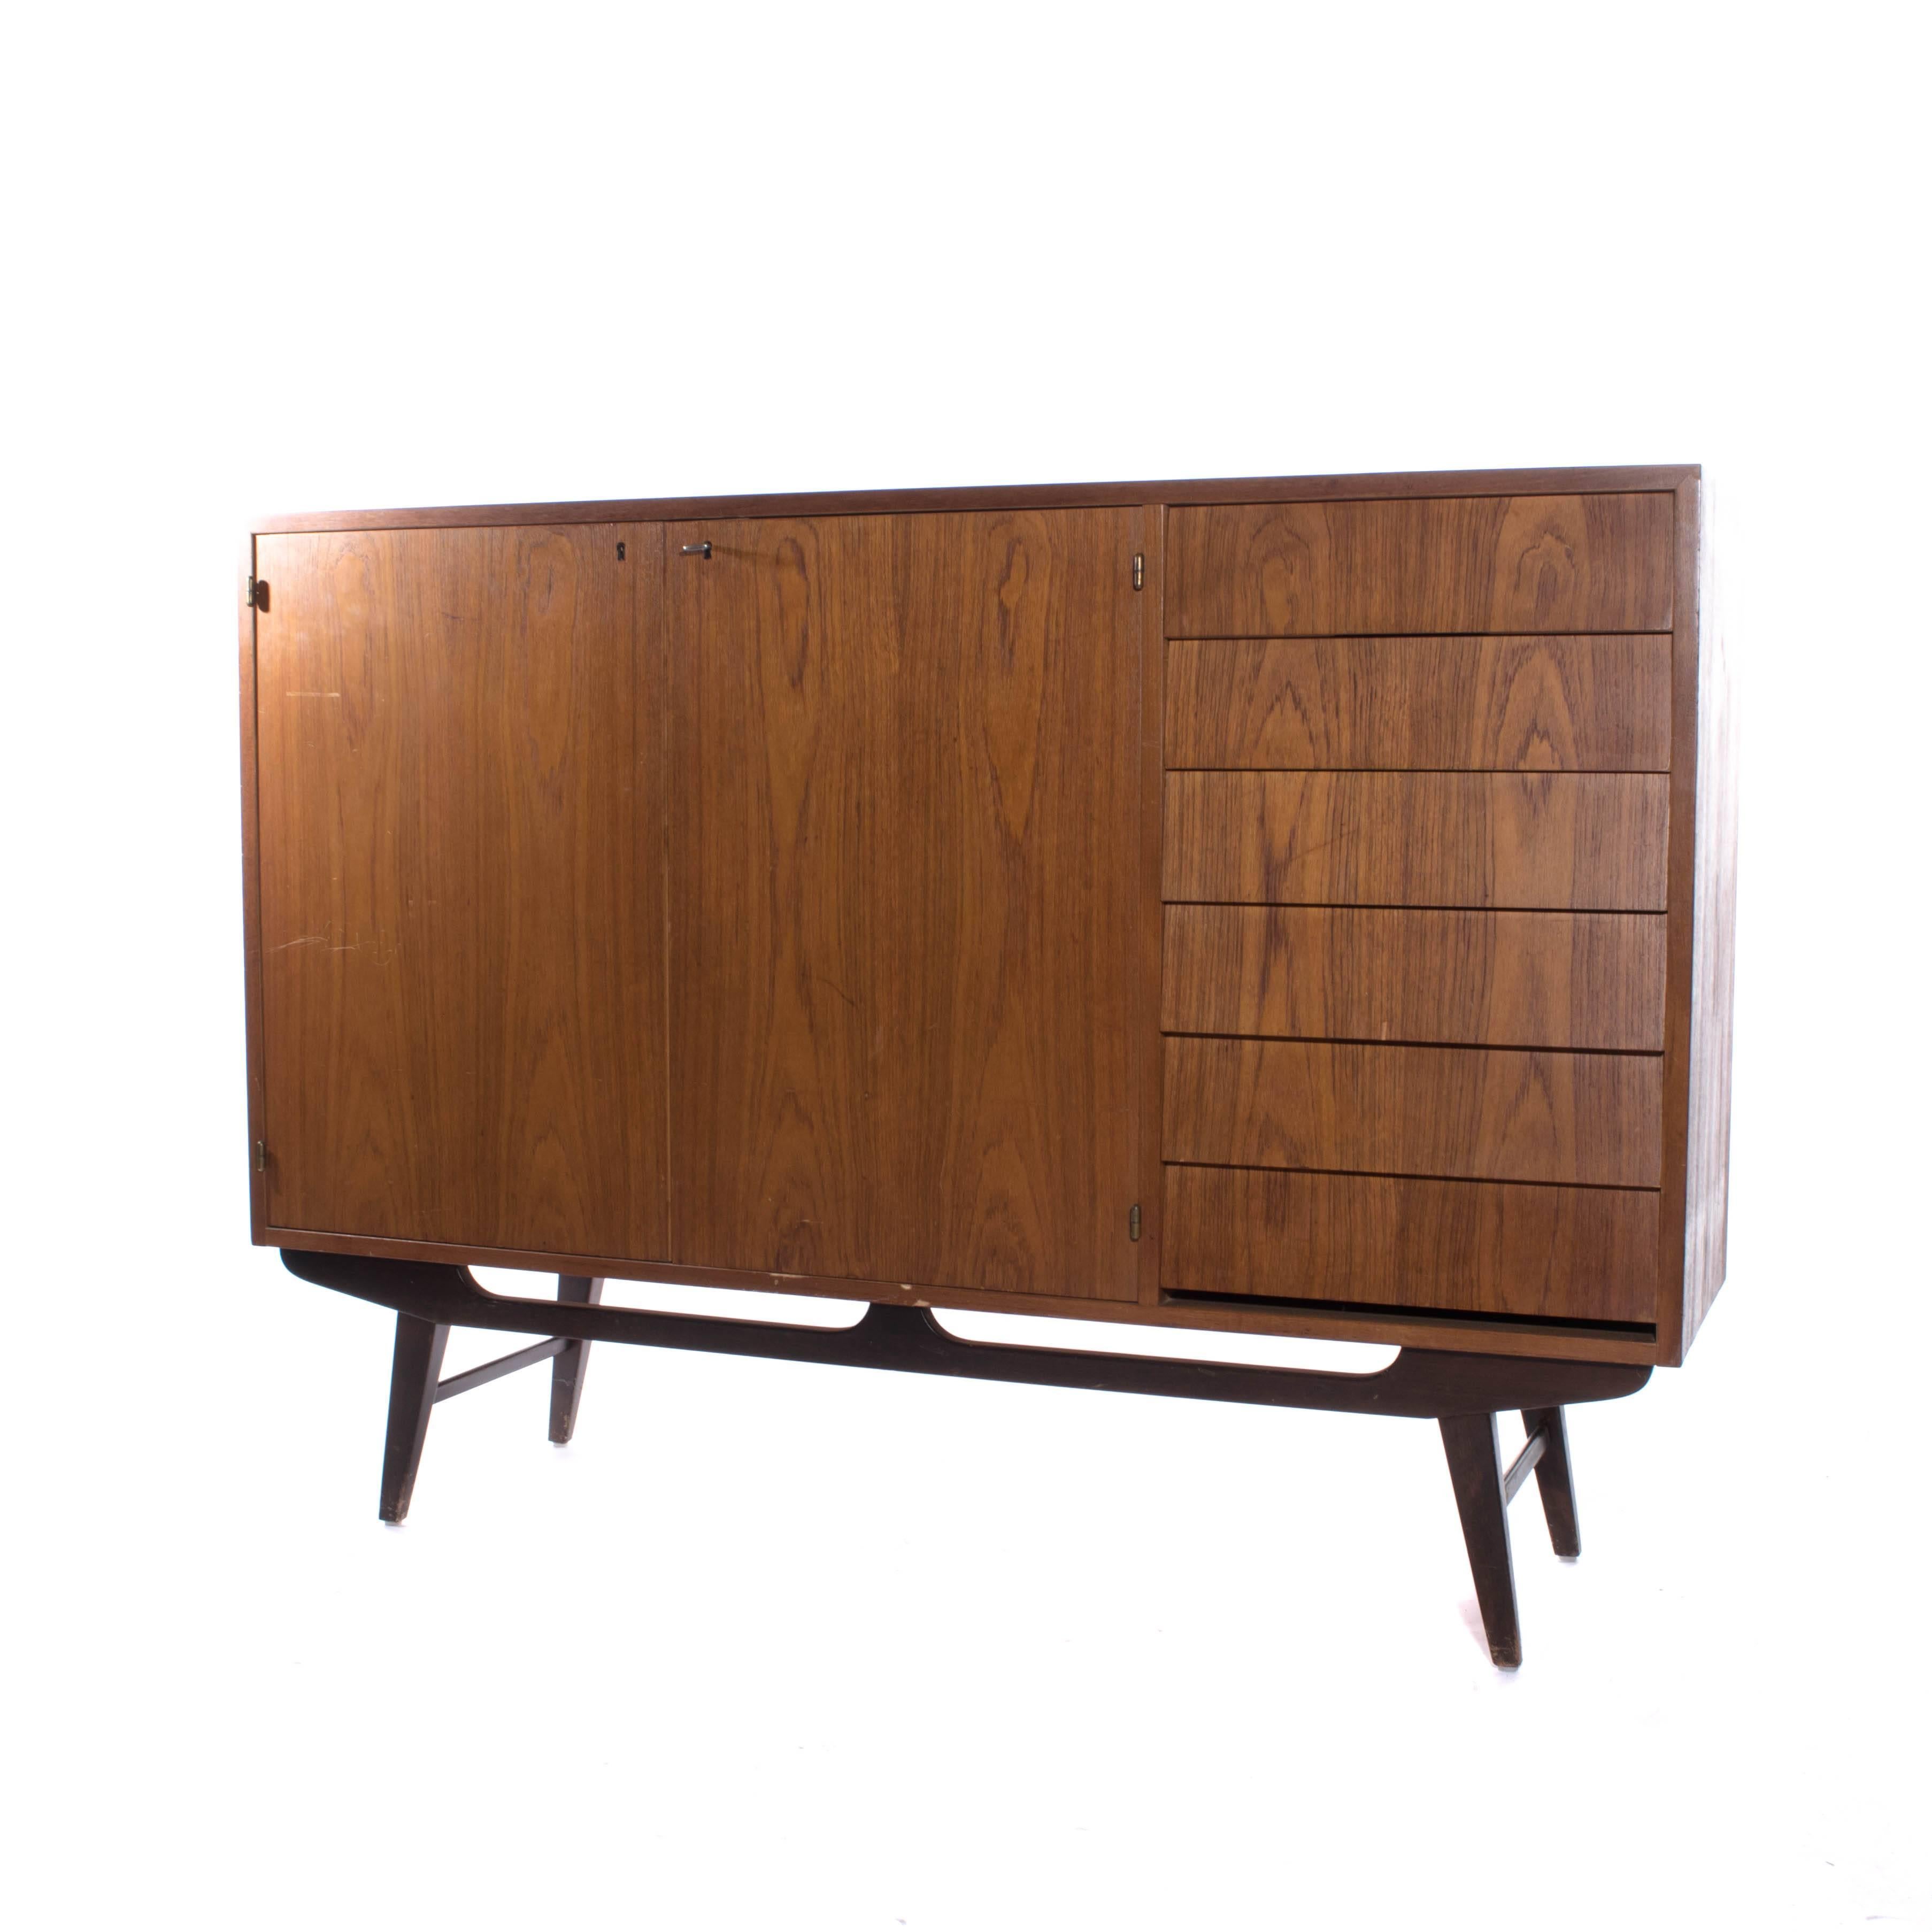 20th Century Teak Sideboard in Unique Design and Stunning Drawers from Sweden, 1950s